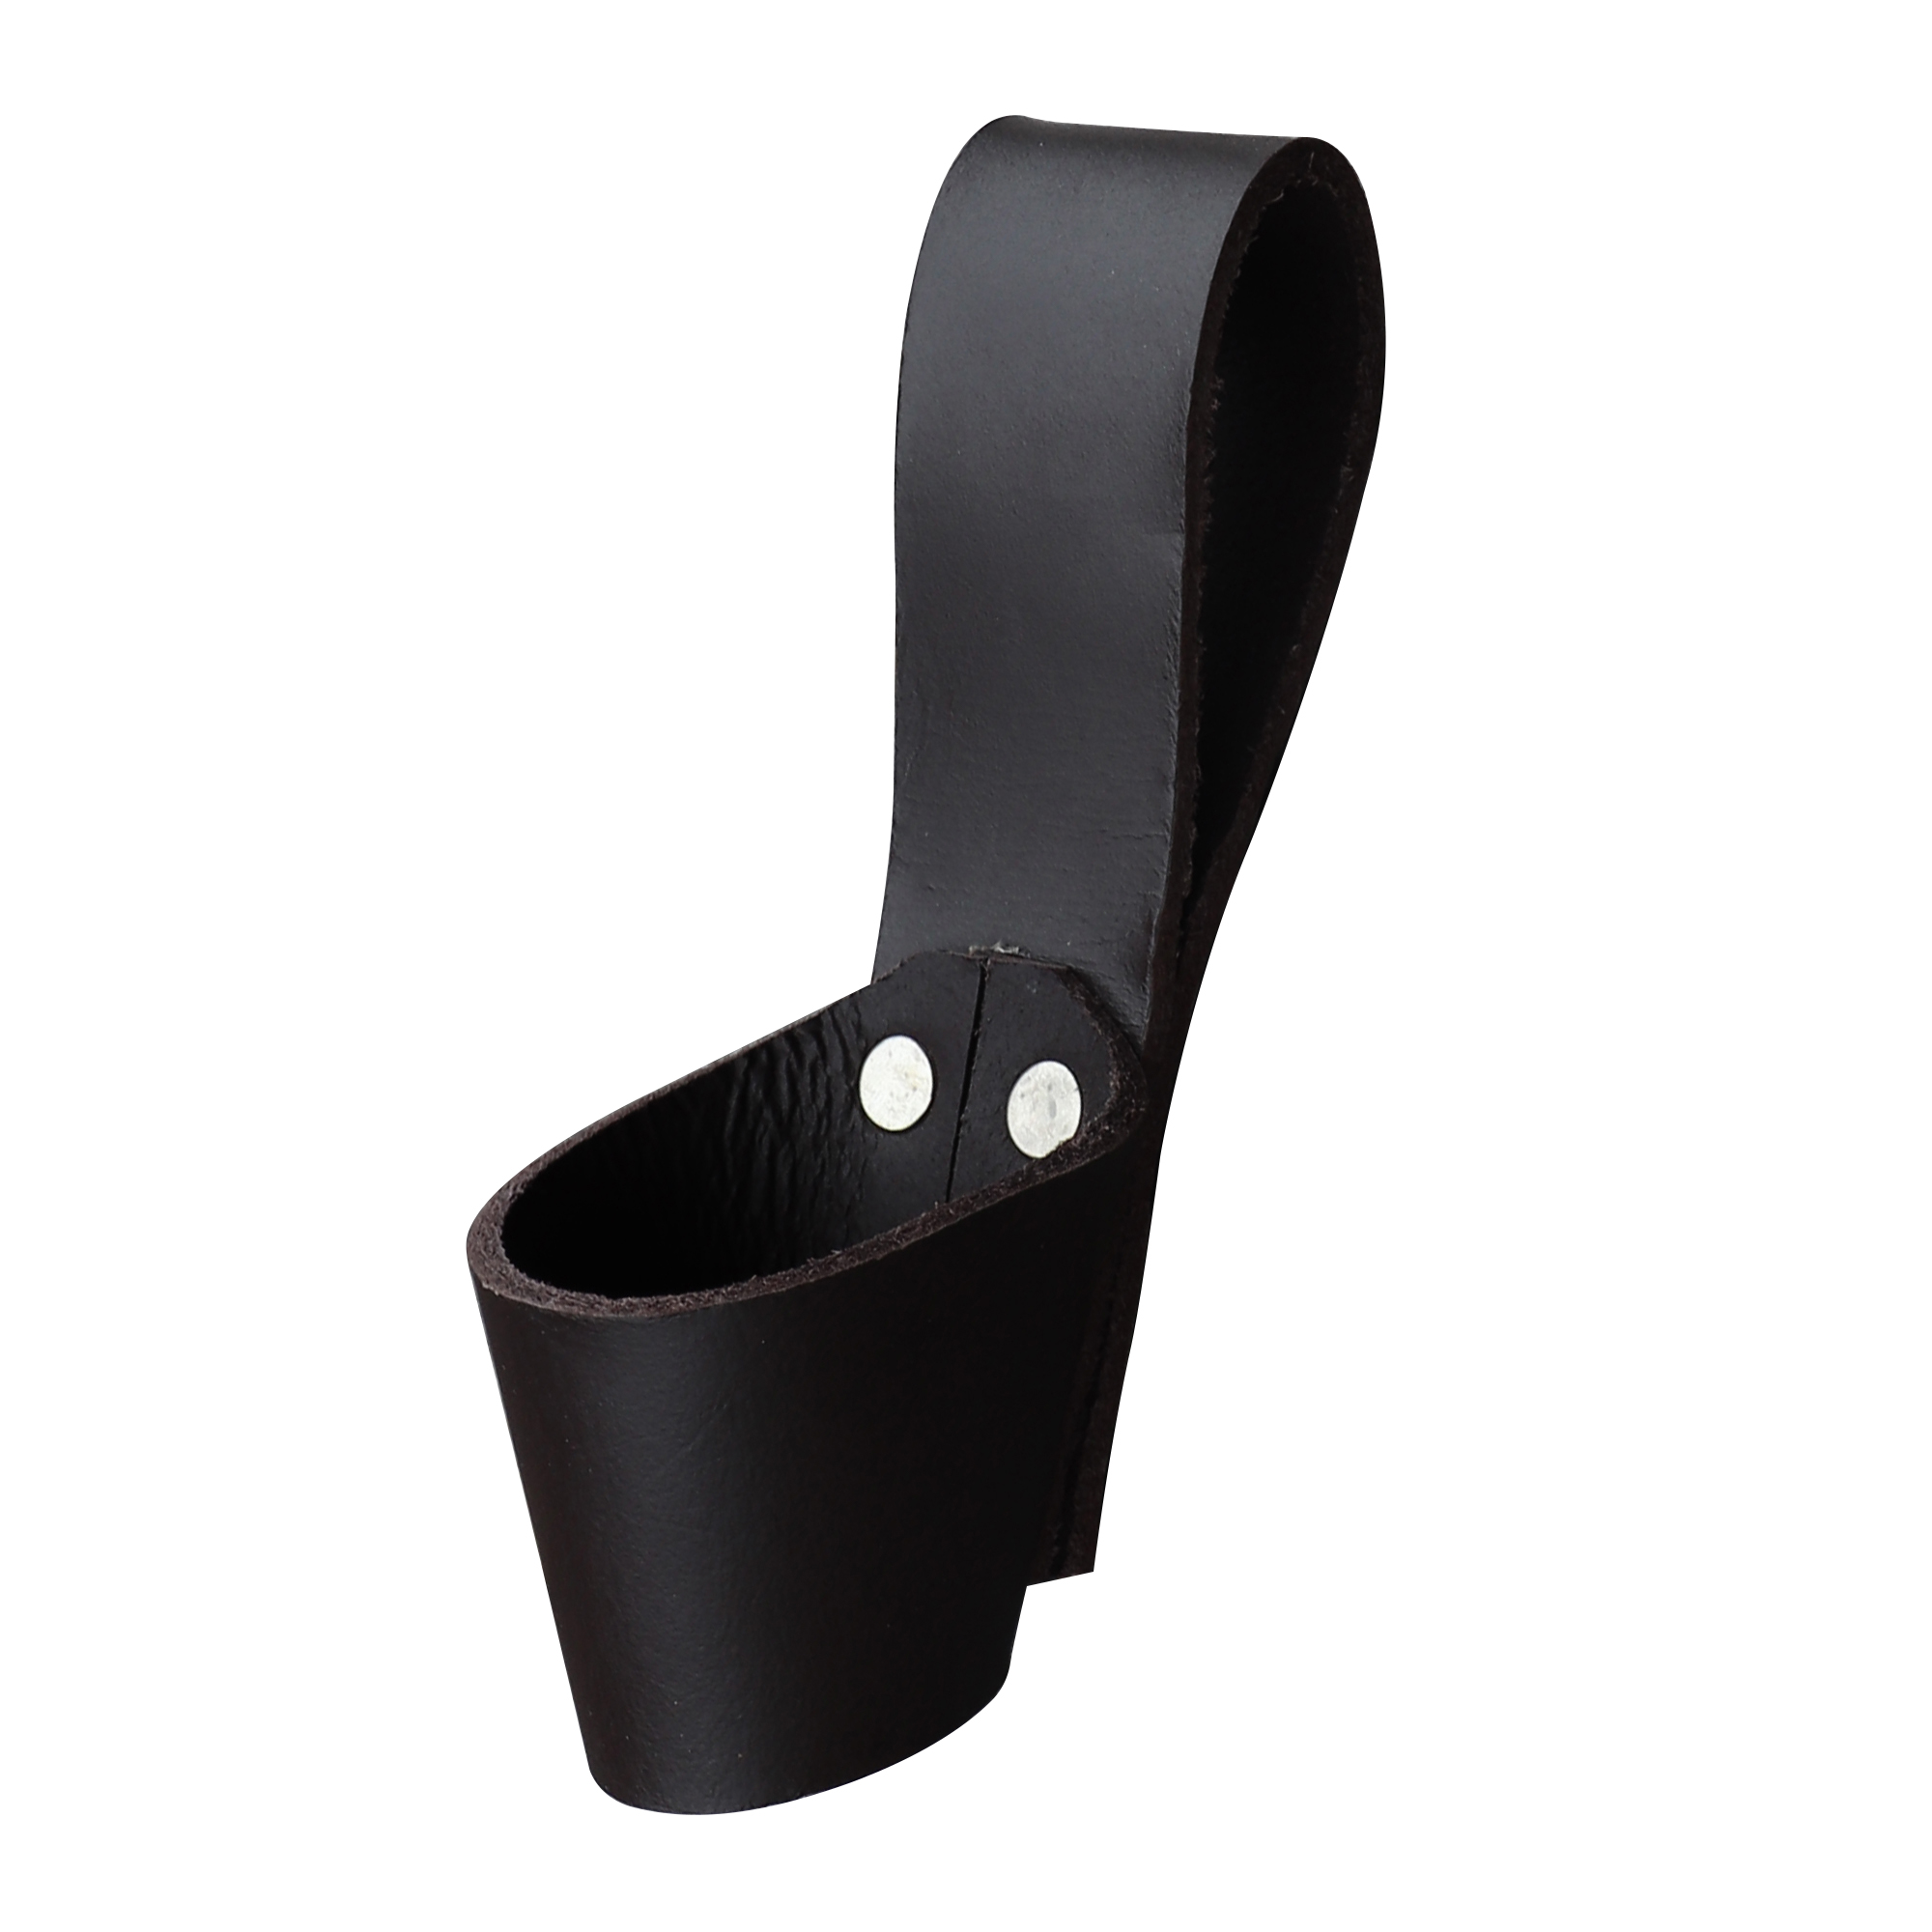 Leather Weapon Belt Hanger Holster Accessory